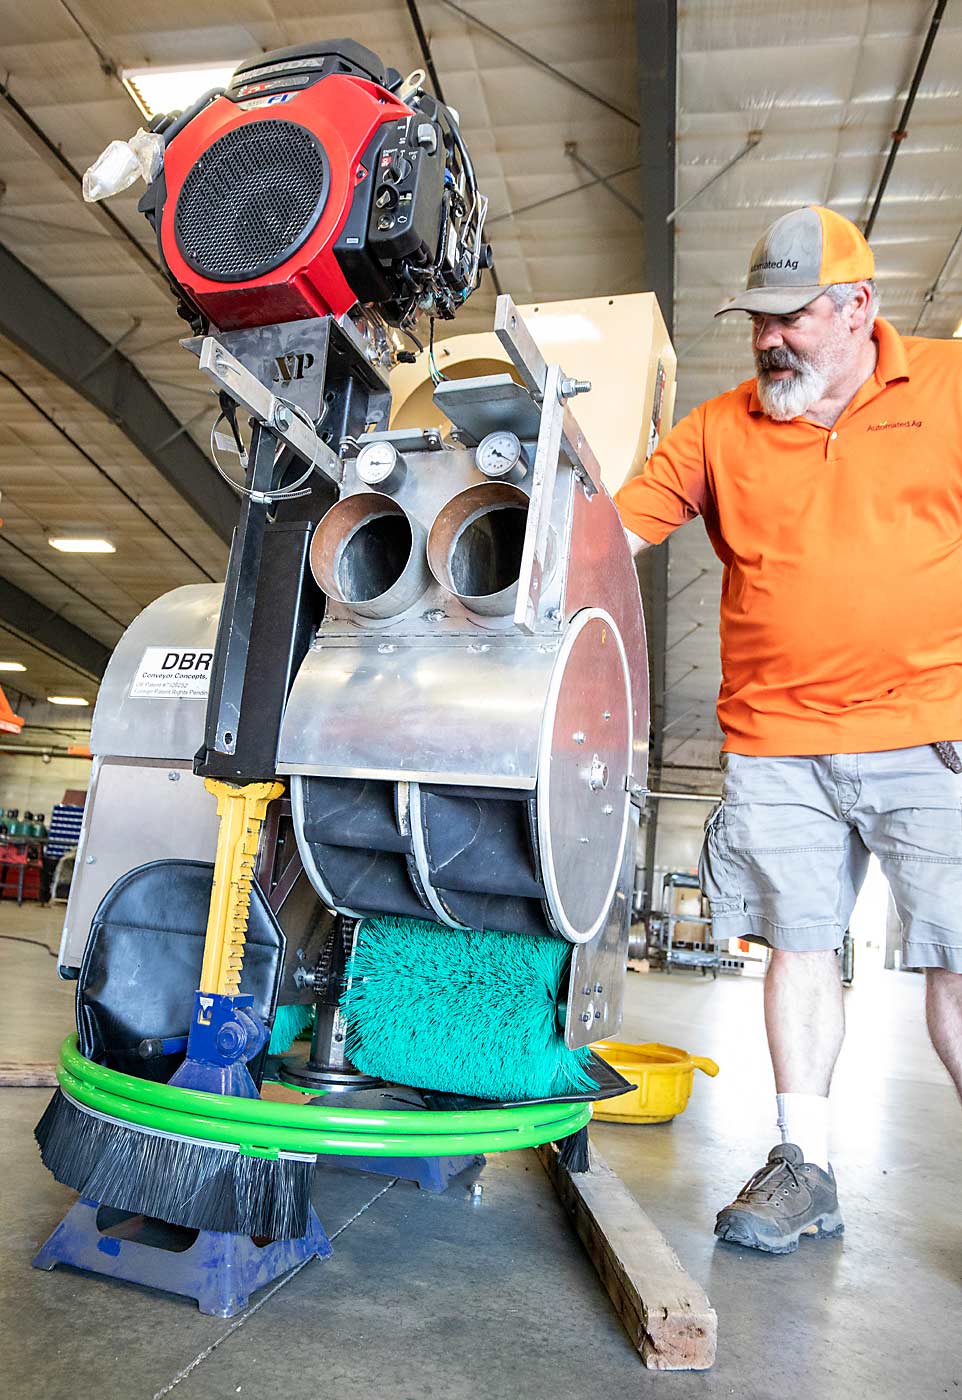 JJ Dagorret shows several of the changes he made to the prototype vacuum harvest machine at Automated Ag Systems in June. The only thing remaining from the original bolt-on version is the decelerator in the center of the machine built by DBR Conveyor Concepts. From top: The original high-RPM engine was replaced with a quieter engine, the vacuum fan blade and housing was redesigned to create more suction, and the optical bin delivery system was replaced with a pre-existing mechanical delivery system developed by MAF Industries. Dagorret says this new version was redesigned based on grower feedback. (TJ Mullinax/Good Fruit Grower)